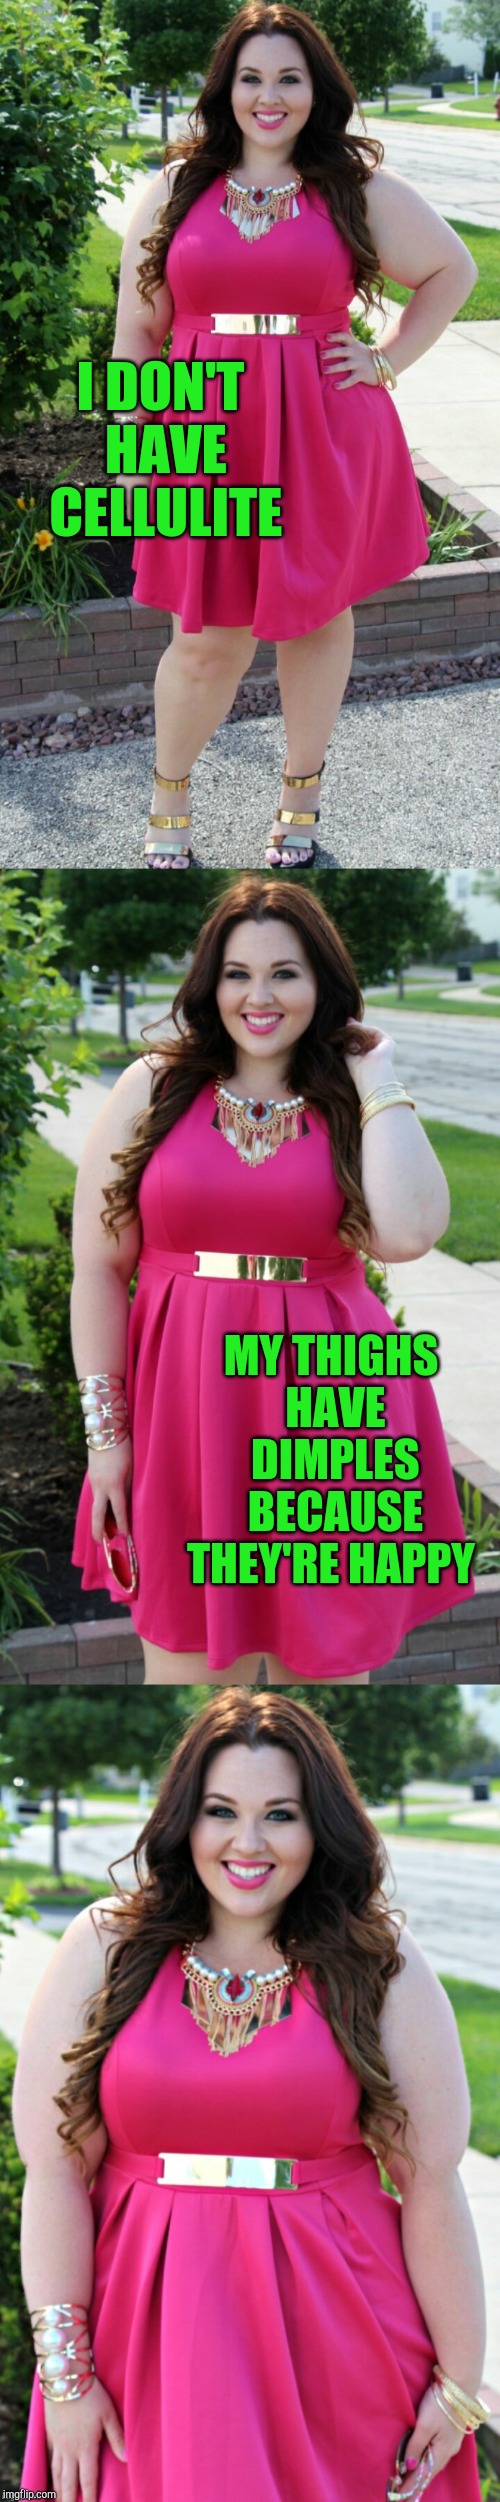 Sarah Rae Vargas joke template | I DON'T HAVE CELLULITE; MY THIGHS HAVE DIMPLES BECAUSE THEY'RE HAPPY | image tagged in sarah rae vargas joke template 1,sarah rae vargas,jbmemegeek,pretty woman,cute girl,cellulite | made w/ Imgflip meme maker